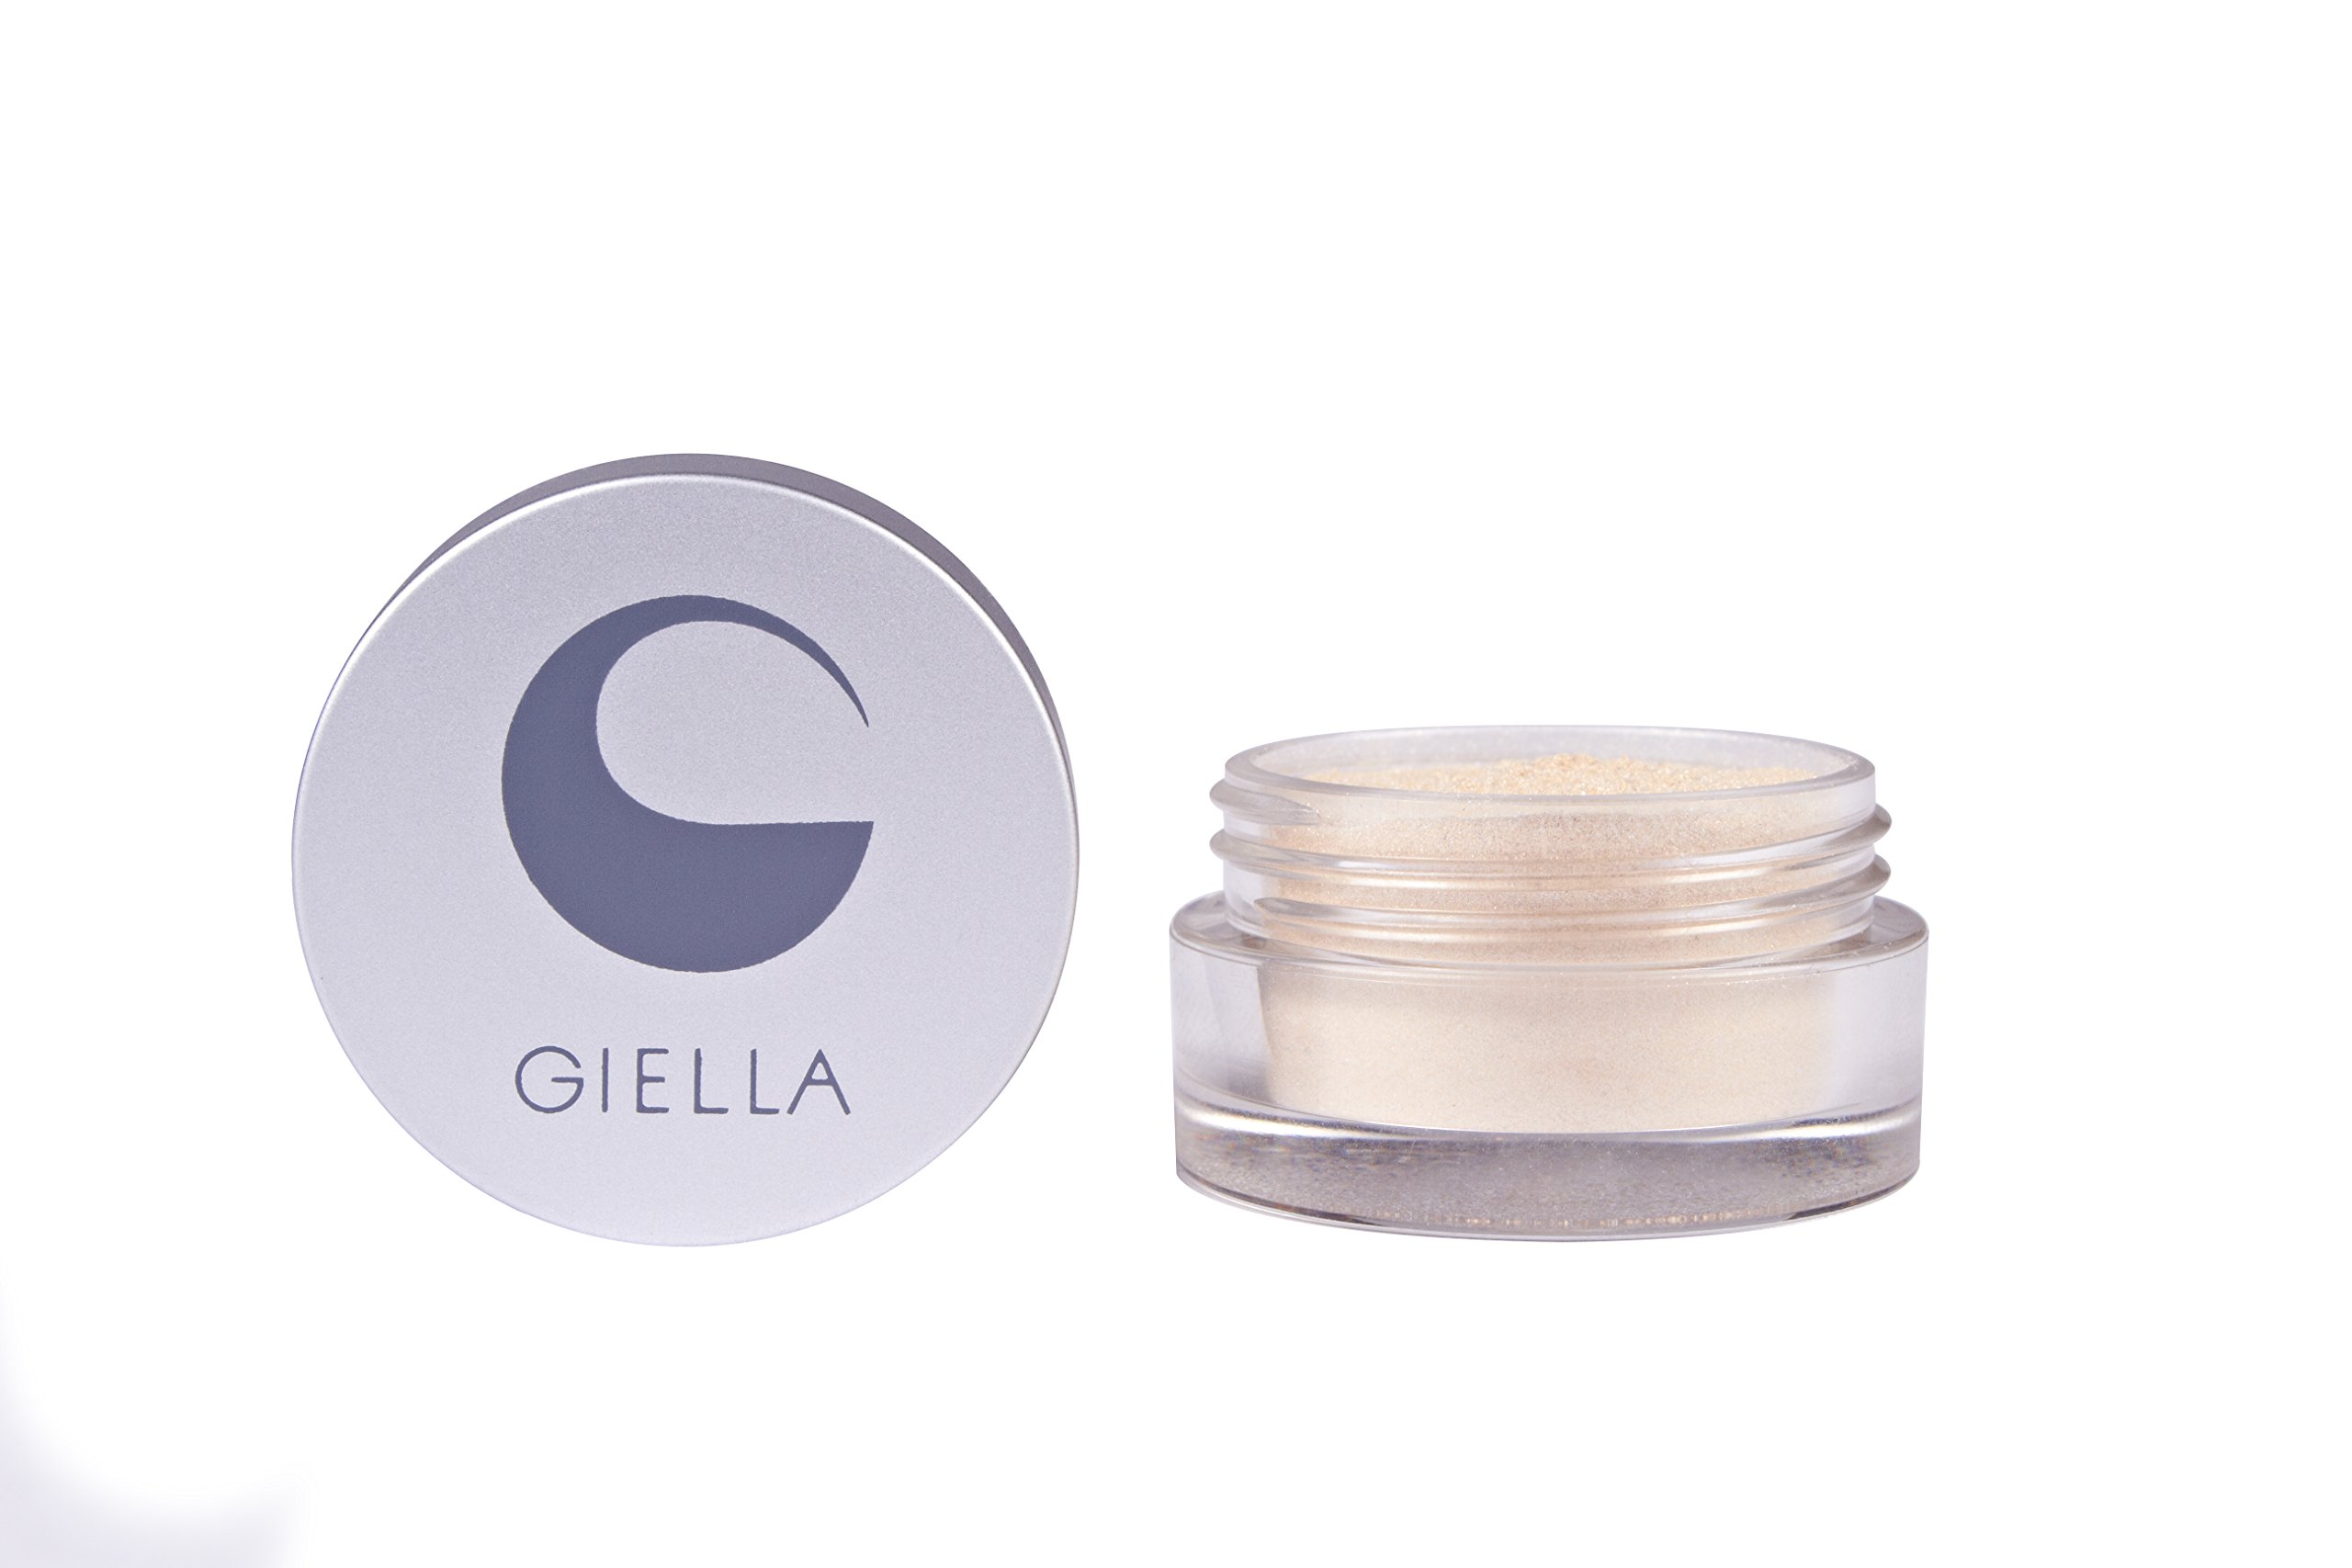 GIELLA B-Dazzle - Created by makeup artists for makeup artists, this universal color became an instant hit at our salons and in demand everywhere!